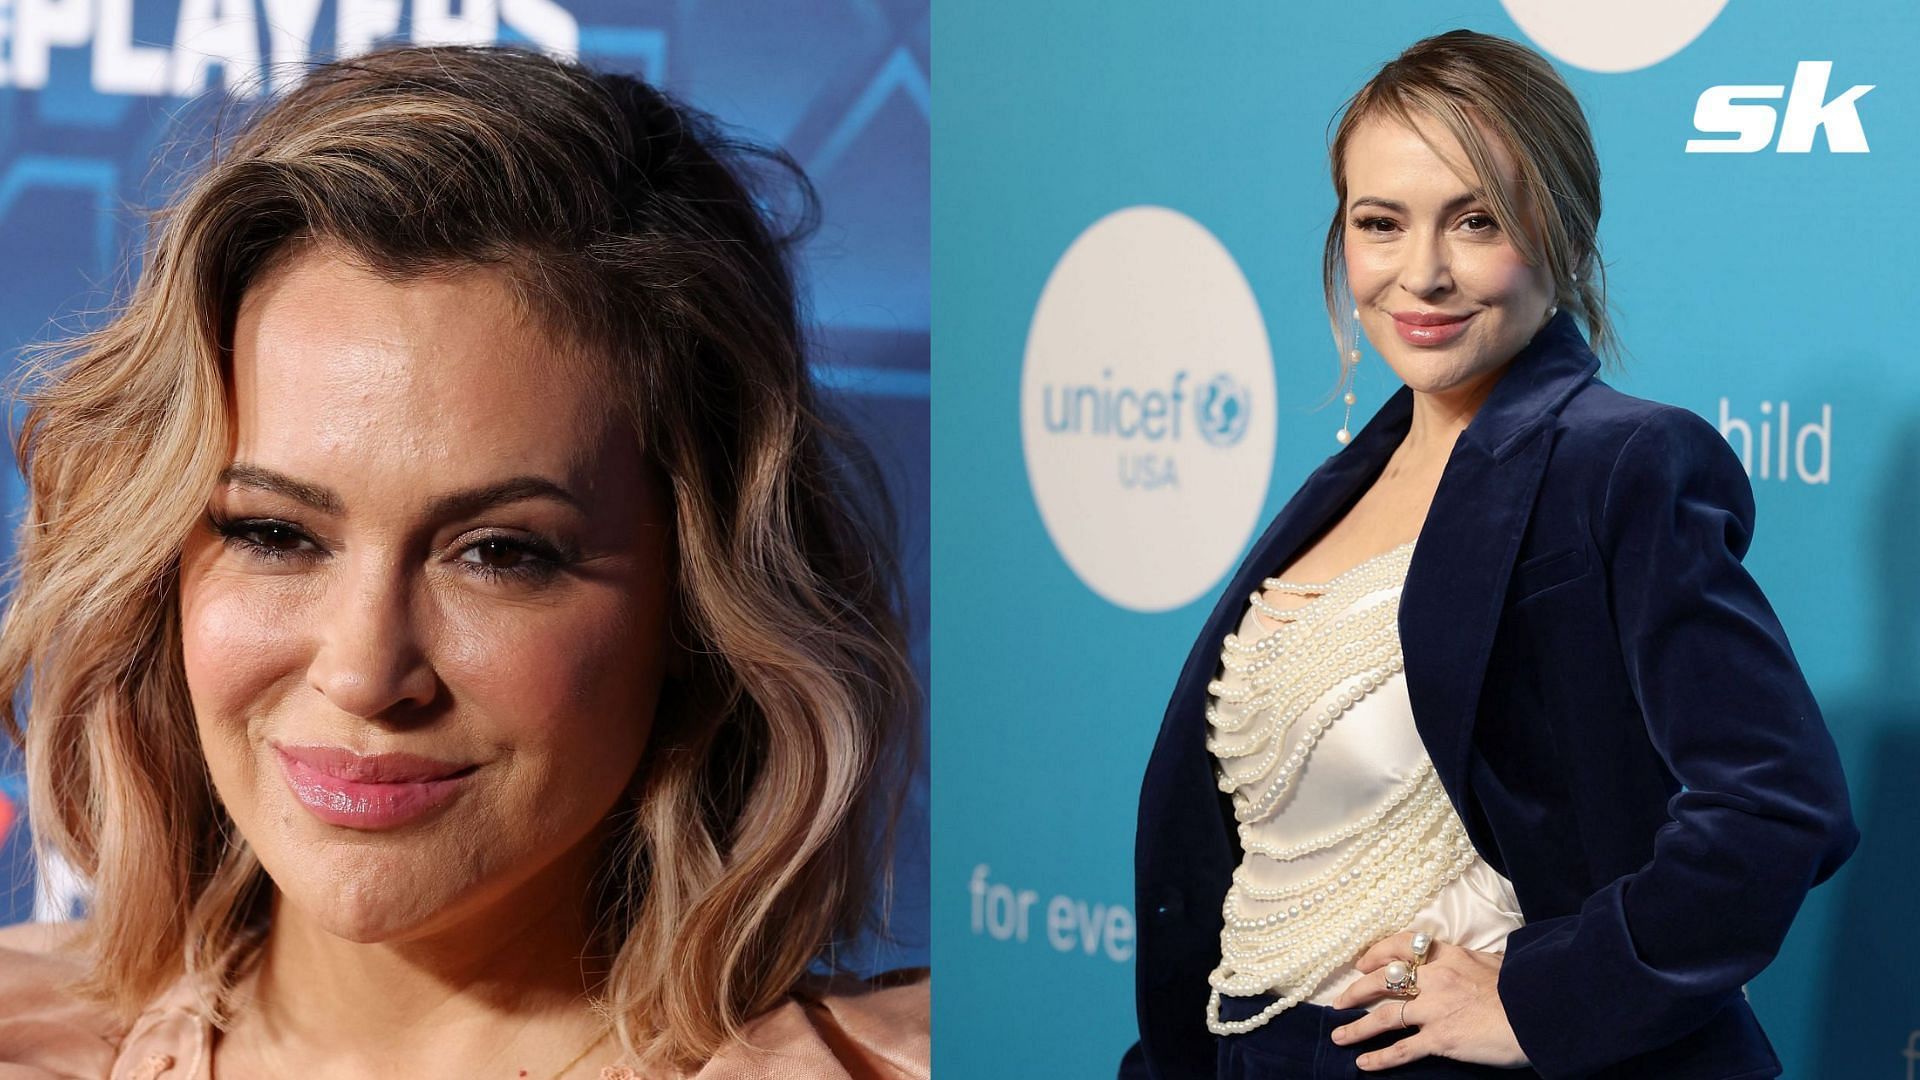 Actress Alyssa Milano has sparked an outrage online after creating GoFundMe campaign for son